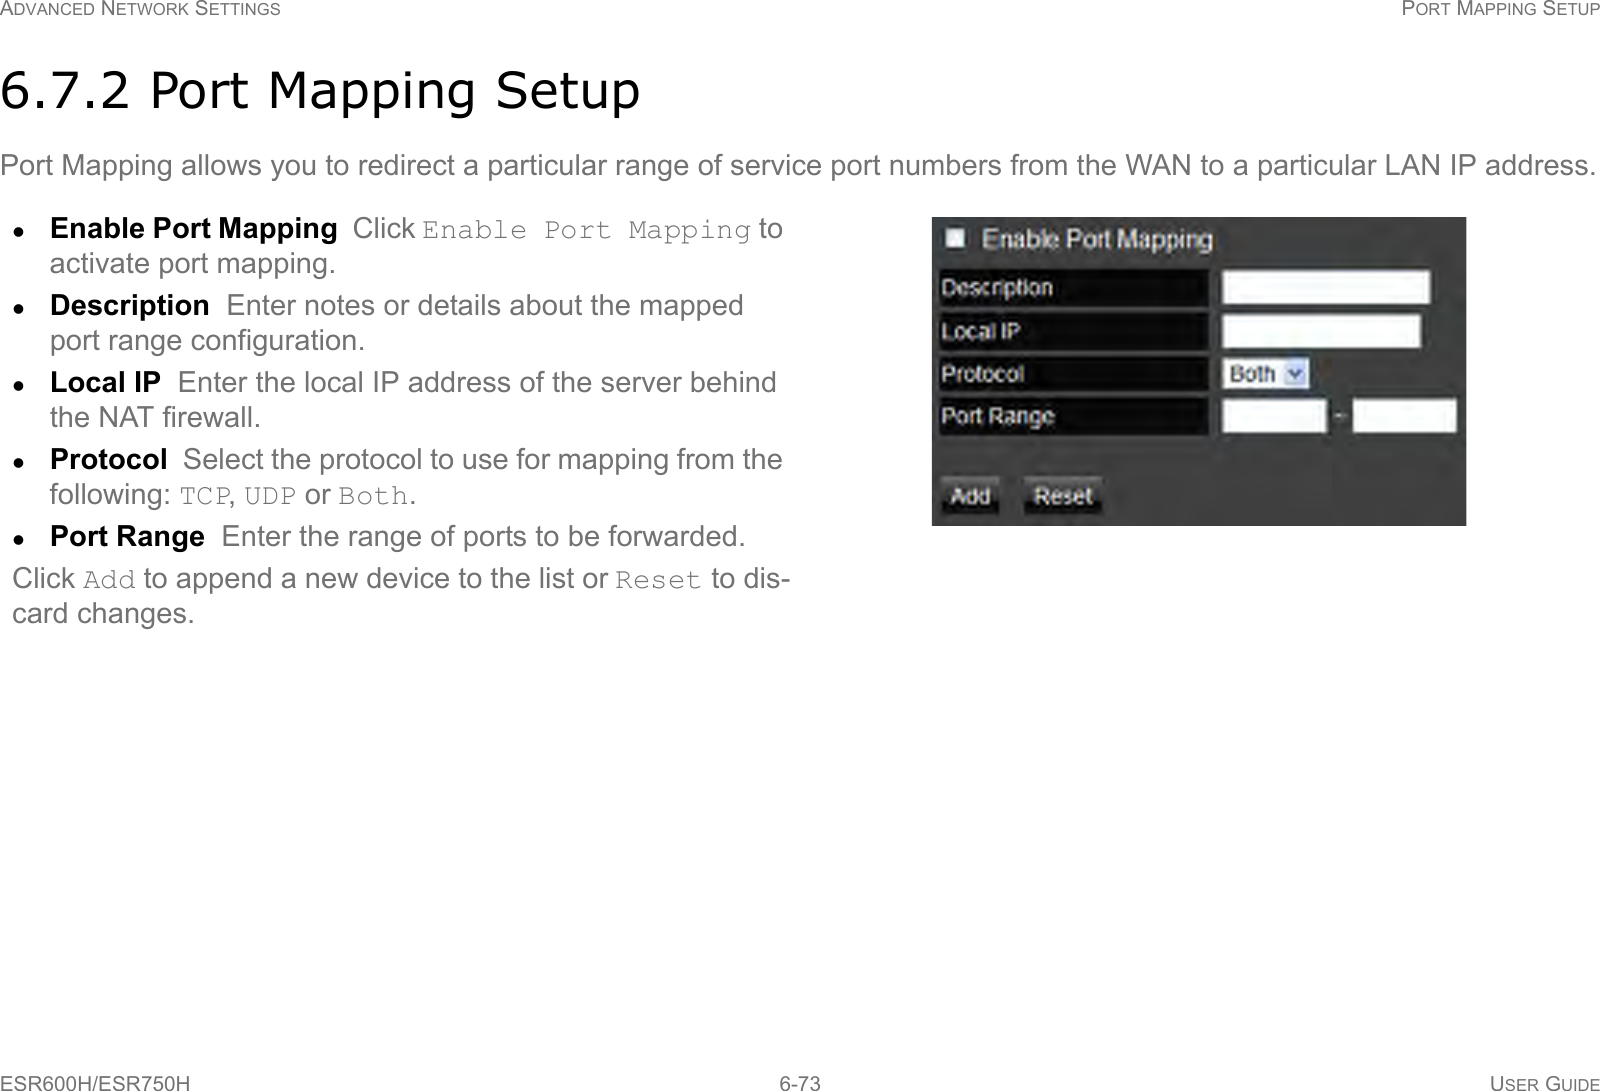 ADVANCED NETWORK SETTINGS PORT MAPPING SETUPESR600H/ESR750H 6-73 USER GUIDE6.7.2 Port Mapping SetupPort Mapping allows you to redirect a particular range of service port numbers from the WAN to a particular LAN IP address.Enable Port Mapping  Click Enable Port Mapping to activate port mapping.Description  Enter notes or details about the mapped port range configuration.Local IP  Enter the local IP address of the server behind the NAT firewall.Protocol  Select the protocol to use for mapping from the following: TCP, UDP or Both.Port Range  Enter the range of ports to be forwarded.Click Add to append a new device to the list or Reset to dis-card changes.